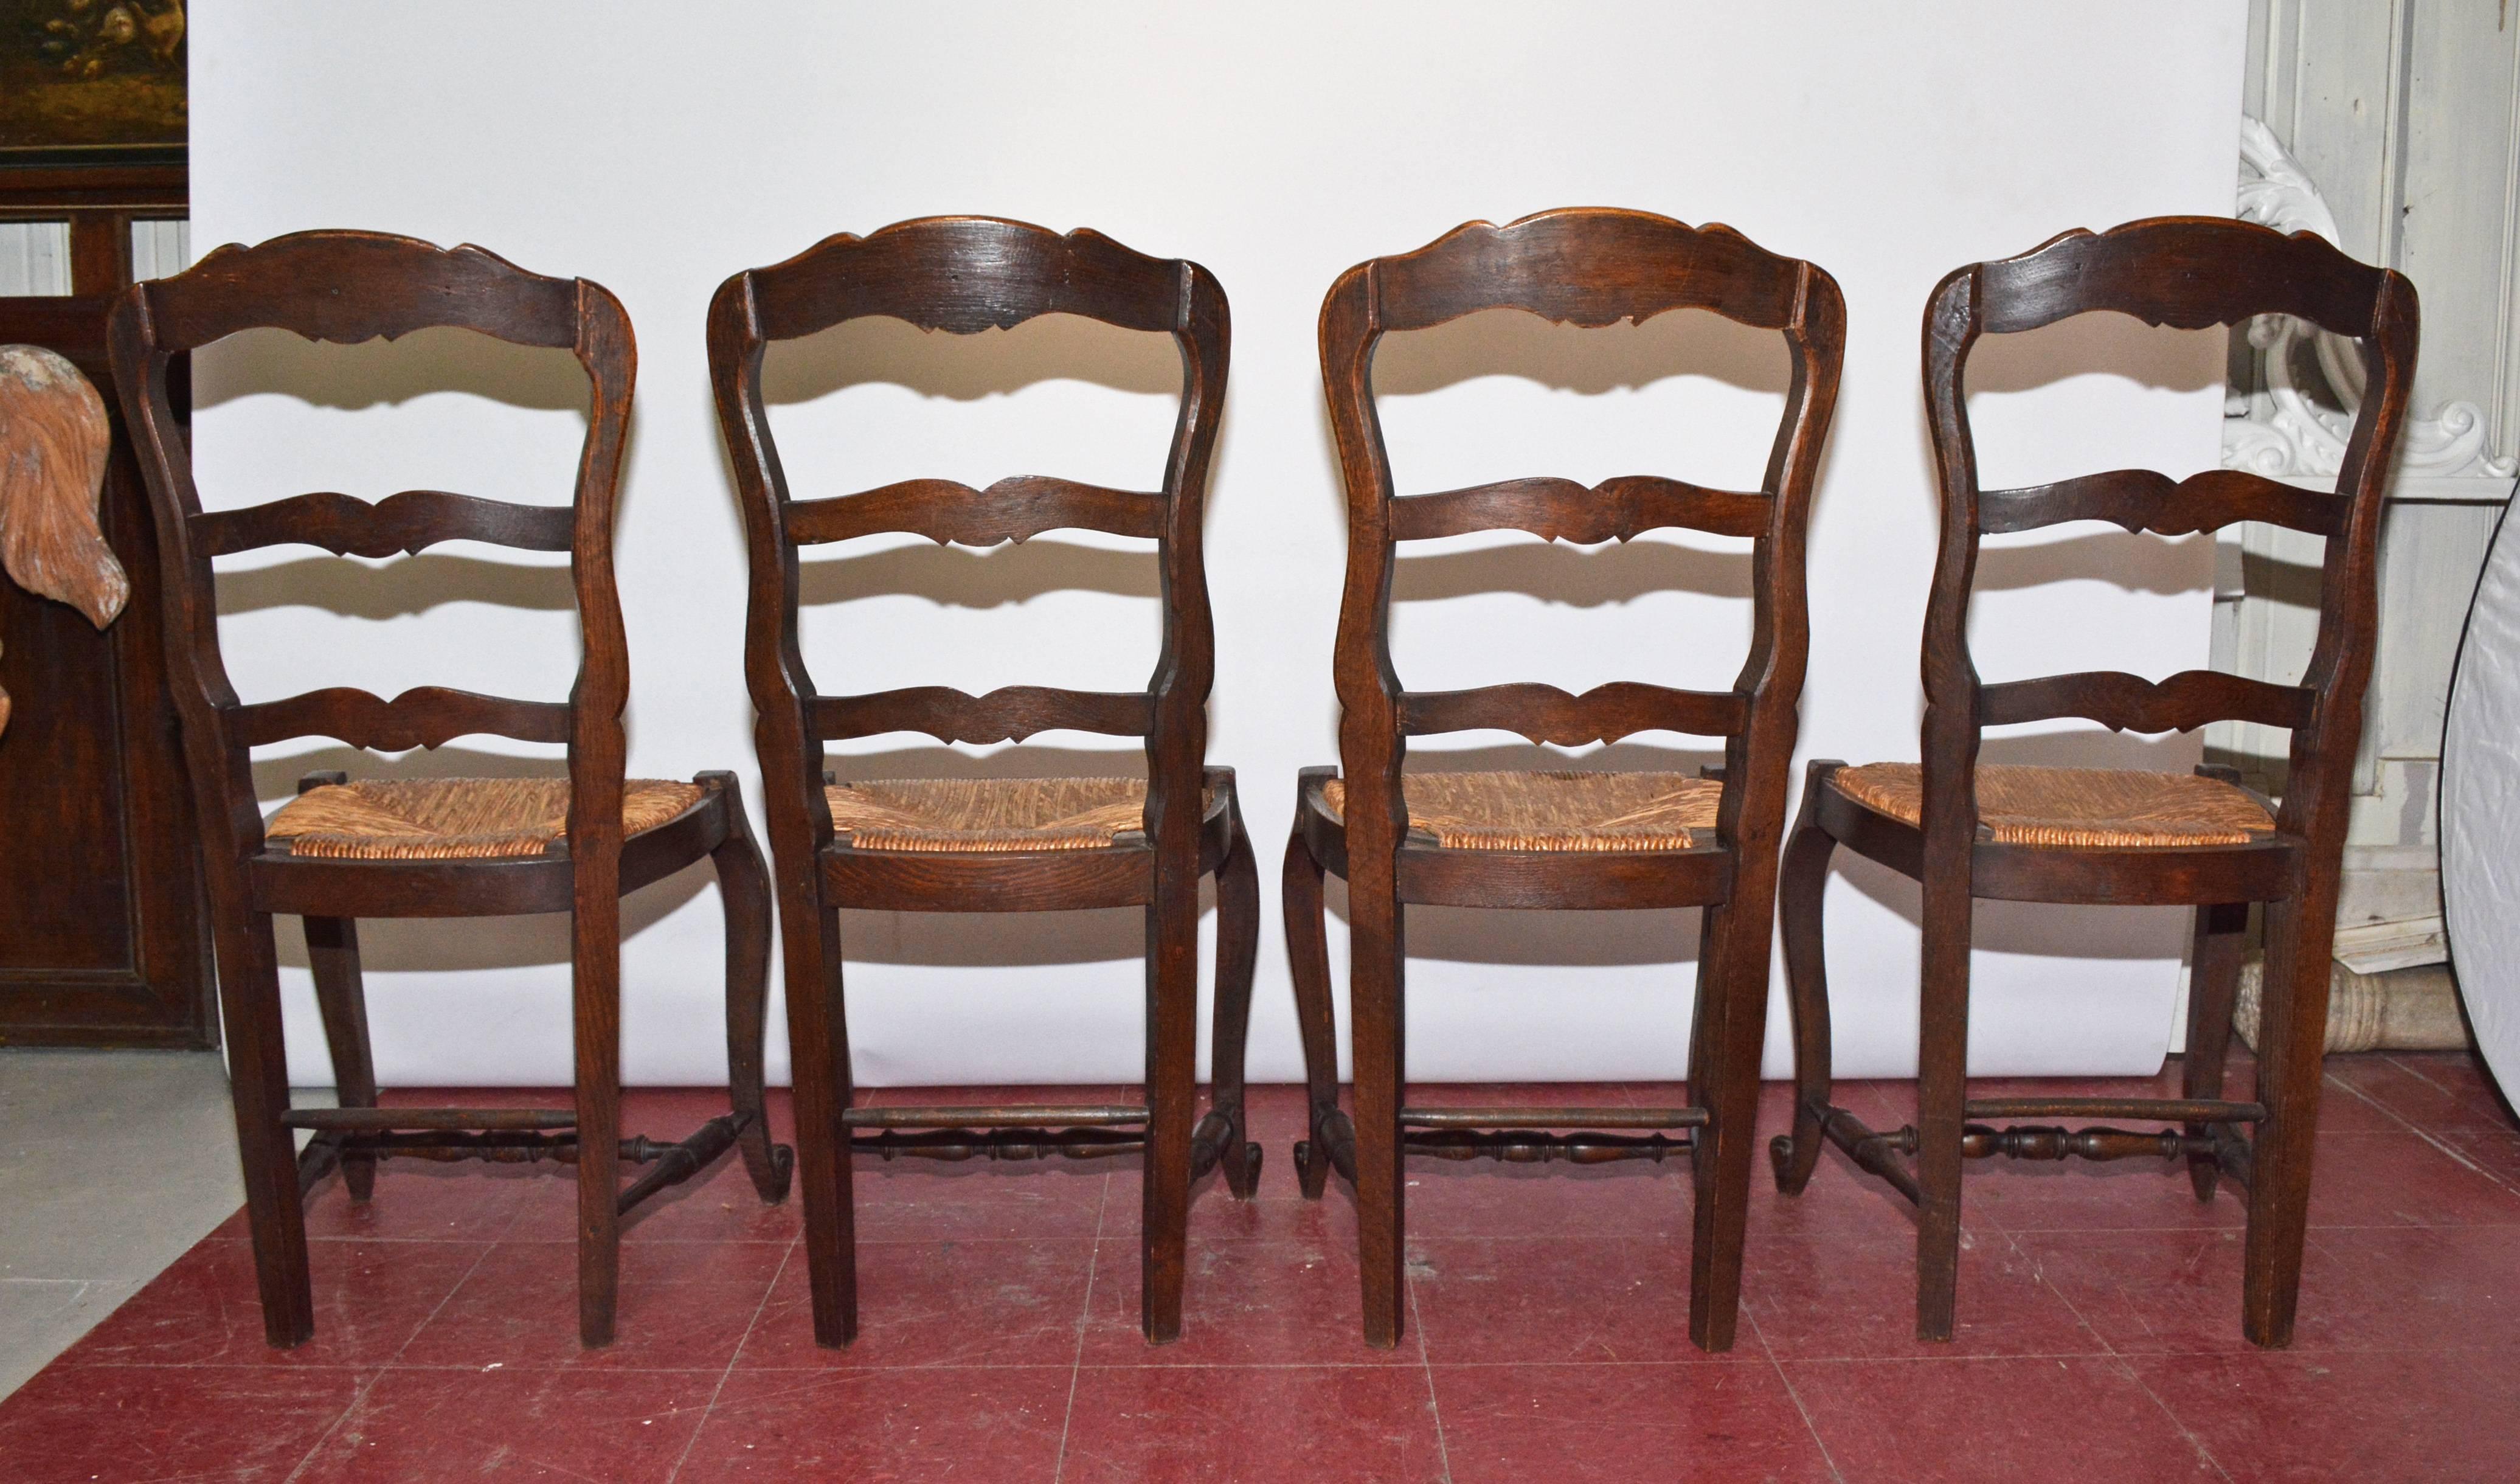 Set of four French Louis XV Provincial dining chairs have hand-carved shells on the crown of the ladder backs and on the seat aprons. There are cabriole legs and turned stretchers and rush seats.  Beautiful patina on antique oak wood.